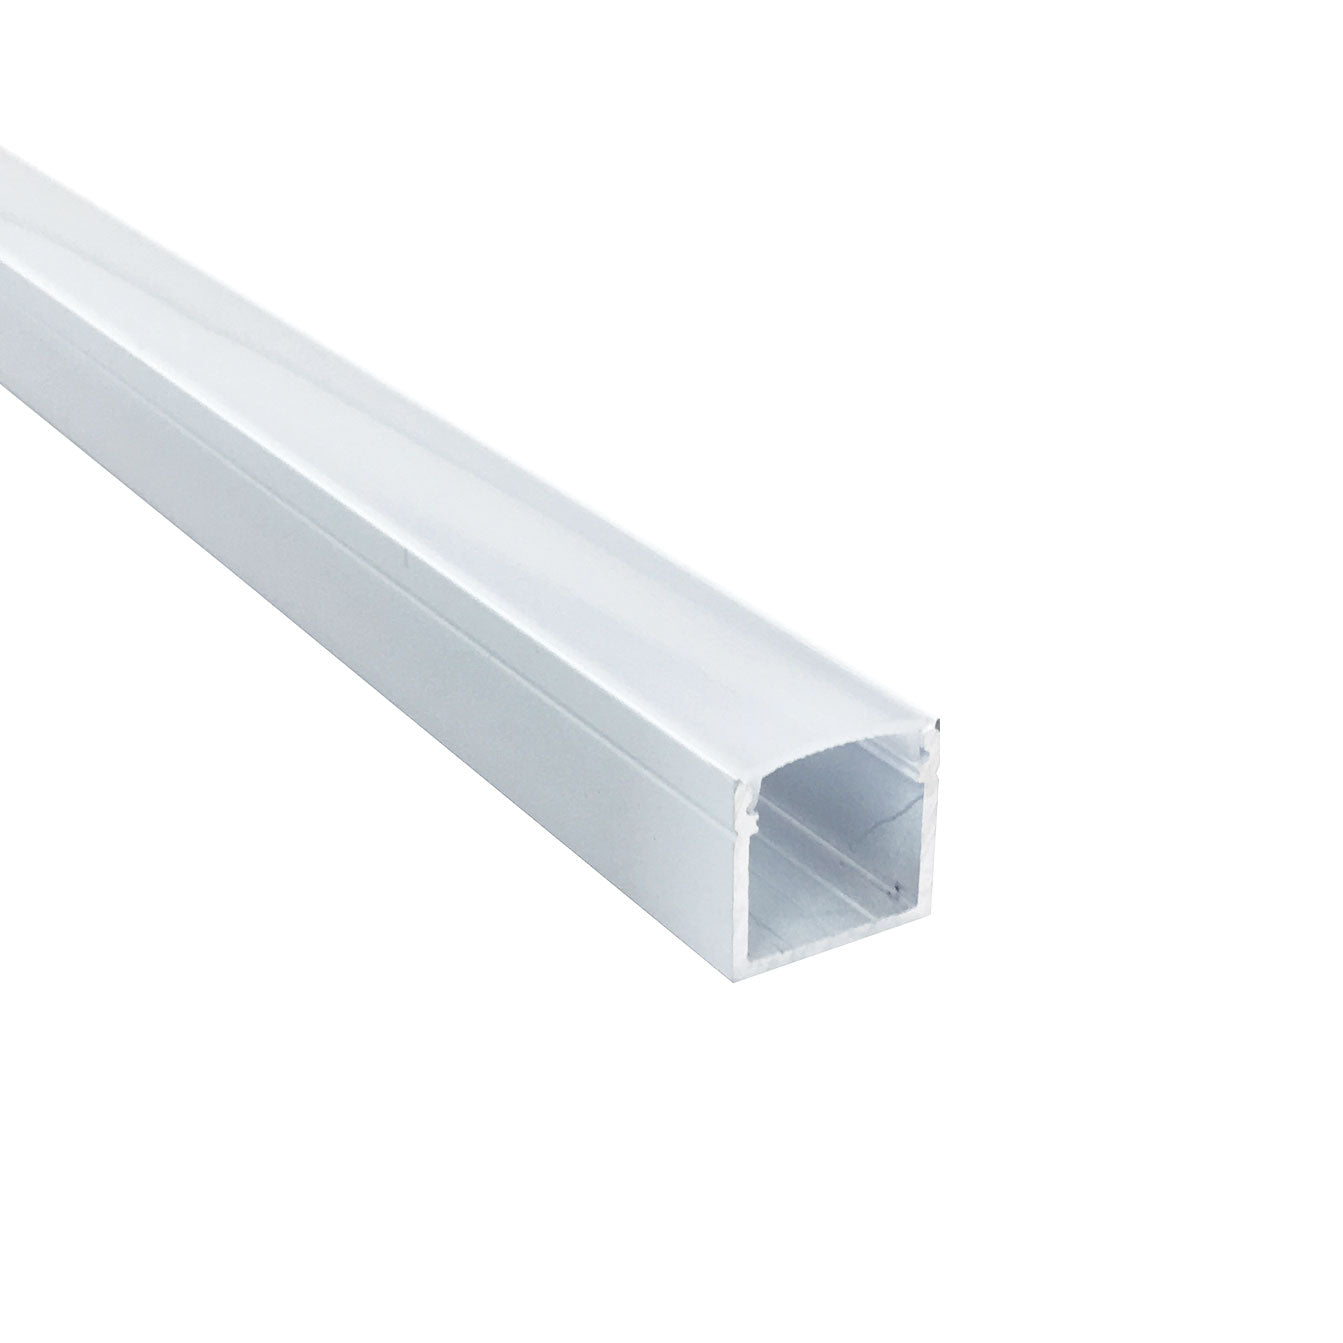 Nora Lighting NATL-CIP26W 4-ft Deep Channel (Plastic Diffuser, End Caps & NUTP13 3M Adhesive Mounting Tape Included) - White